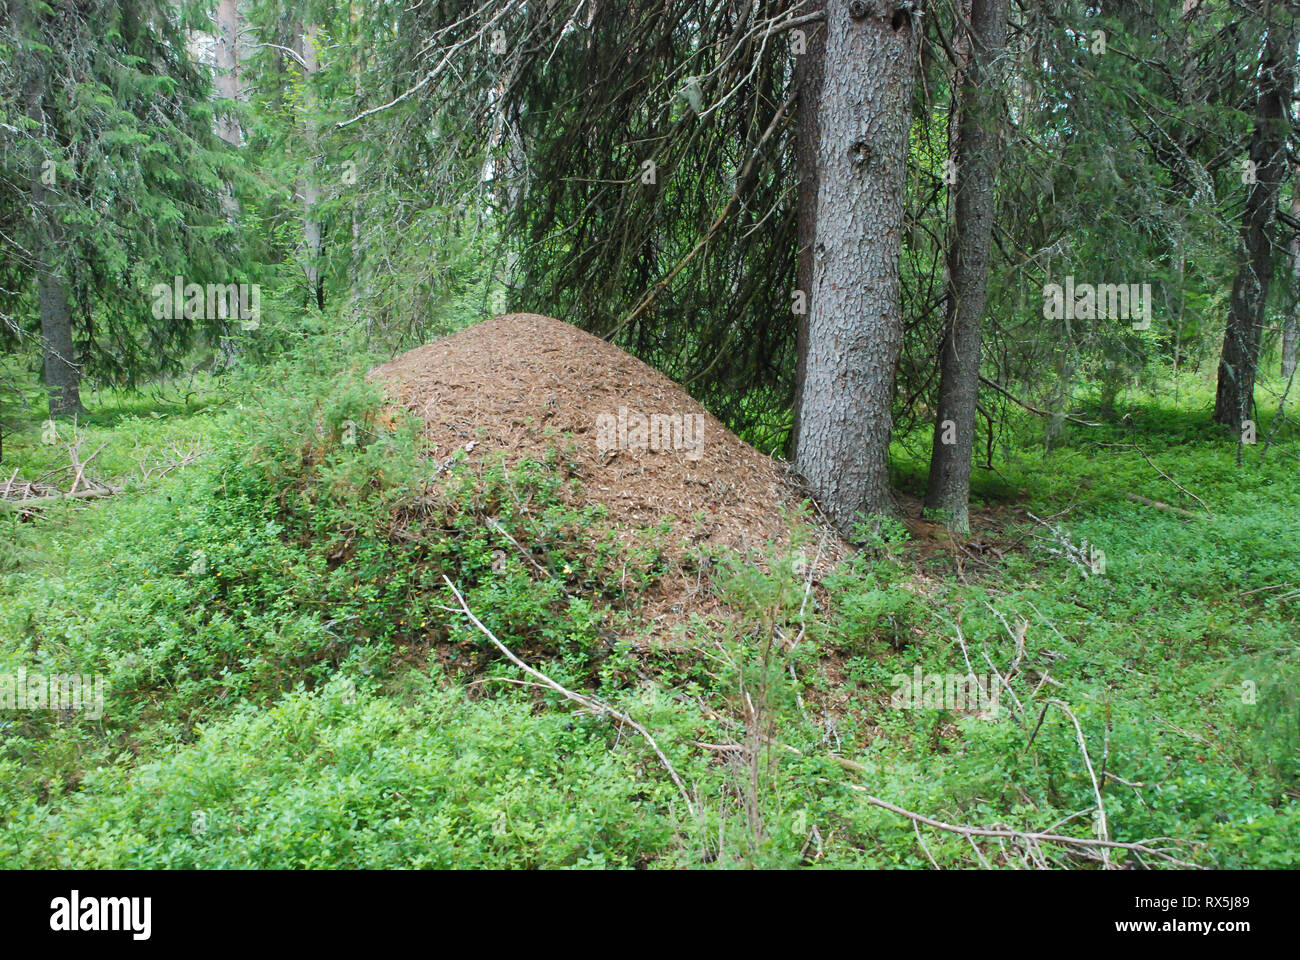 Large wood ant nest in the Taiga Forest (boreal forest) biome, natural wild landscape in north eastern Finland, Europe. Stock Photo